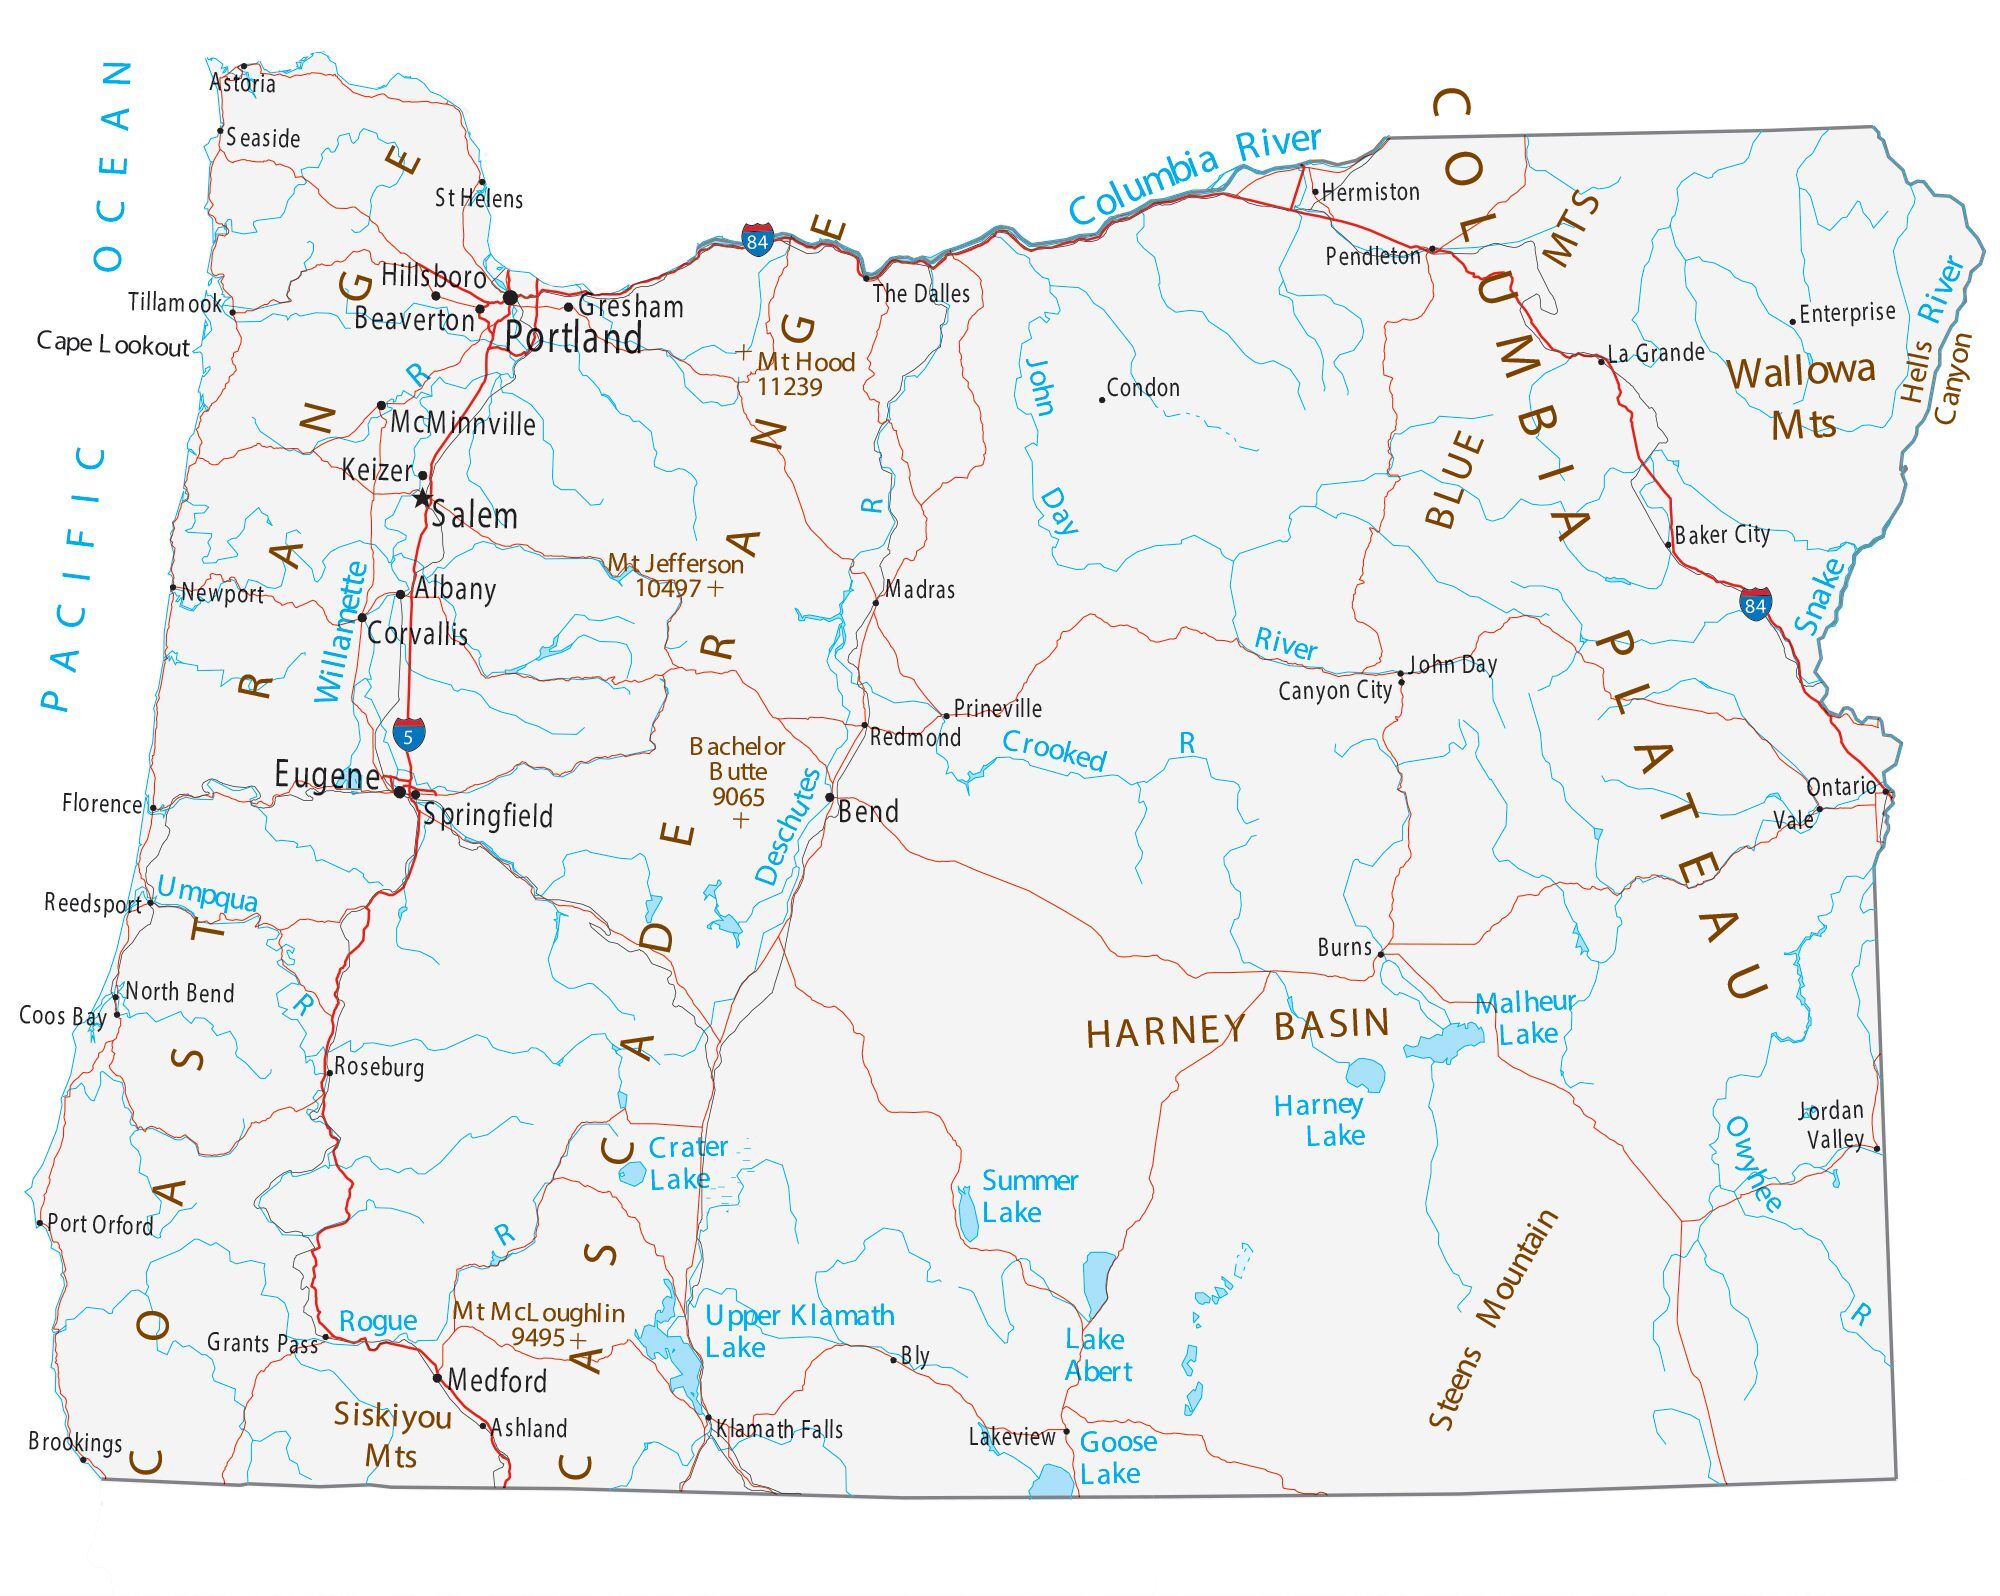 Map of Oregon - Cities and Roads - GIS Geography